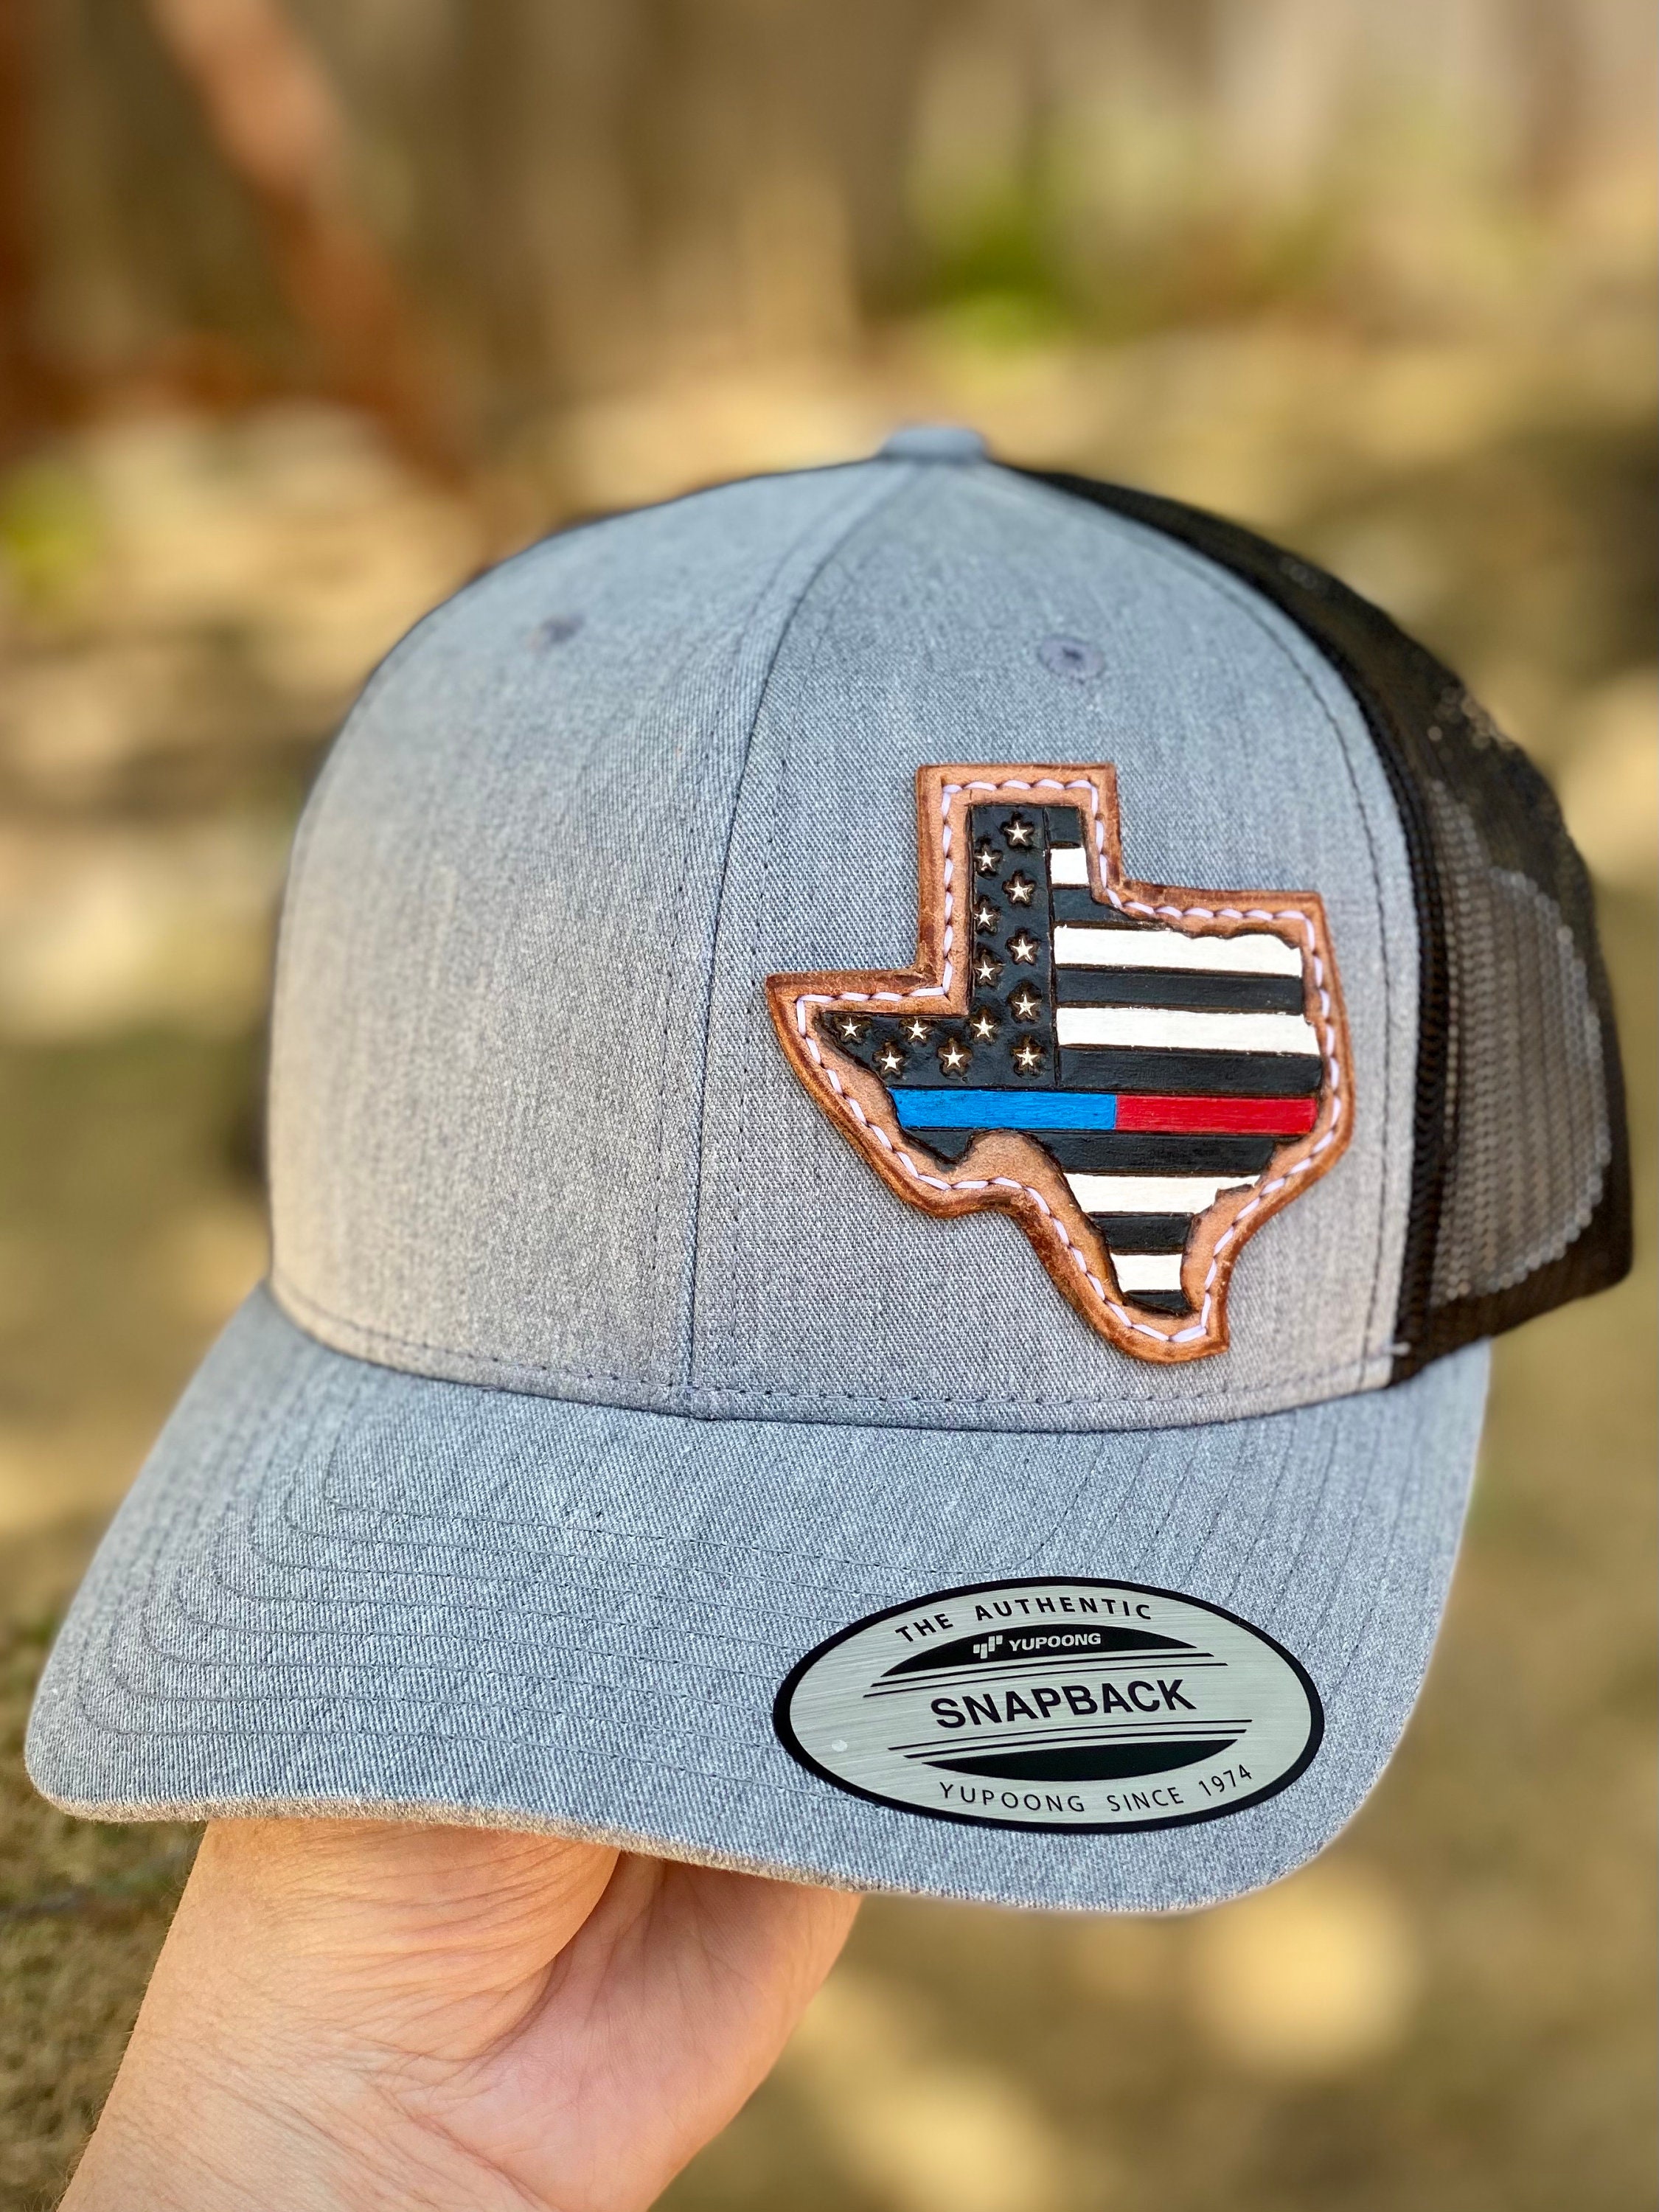 10 Leather Hat Patches Custom made from Genuine Leather with Your Logo,  Text, or Design in Any Shape - 10 Count - Ships VERY FAST!